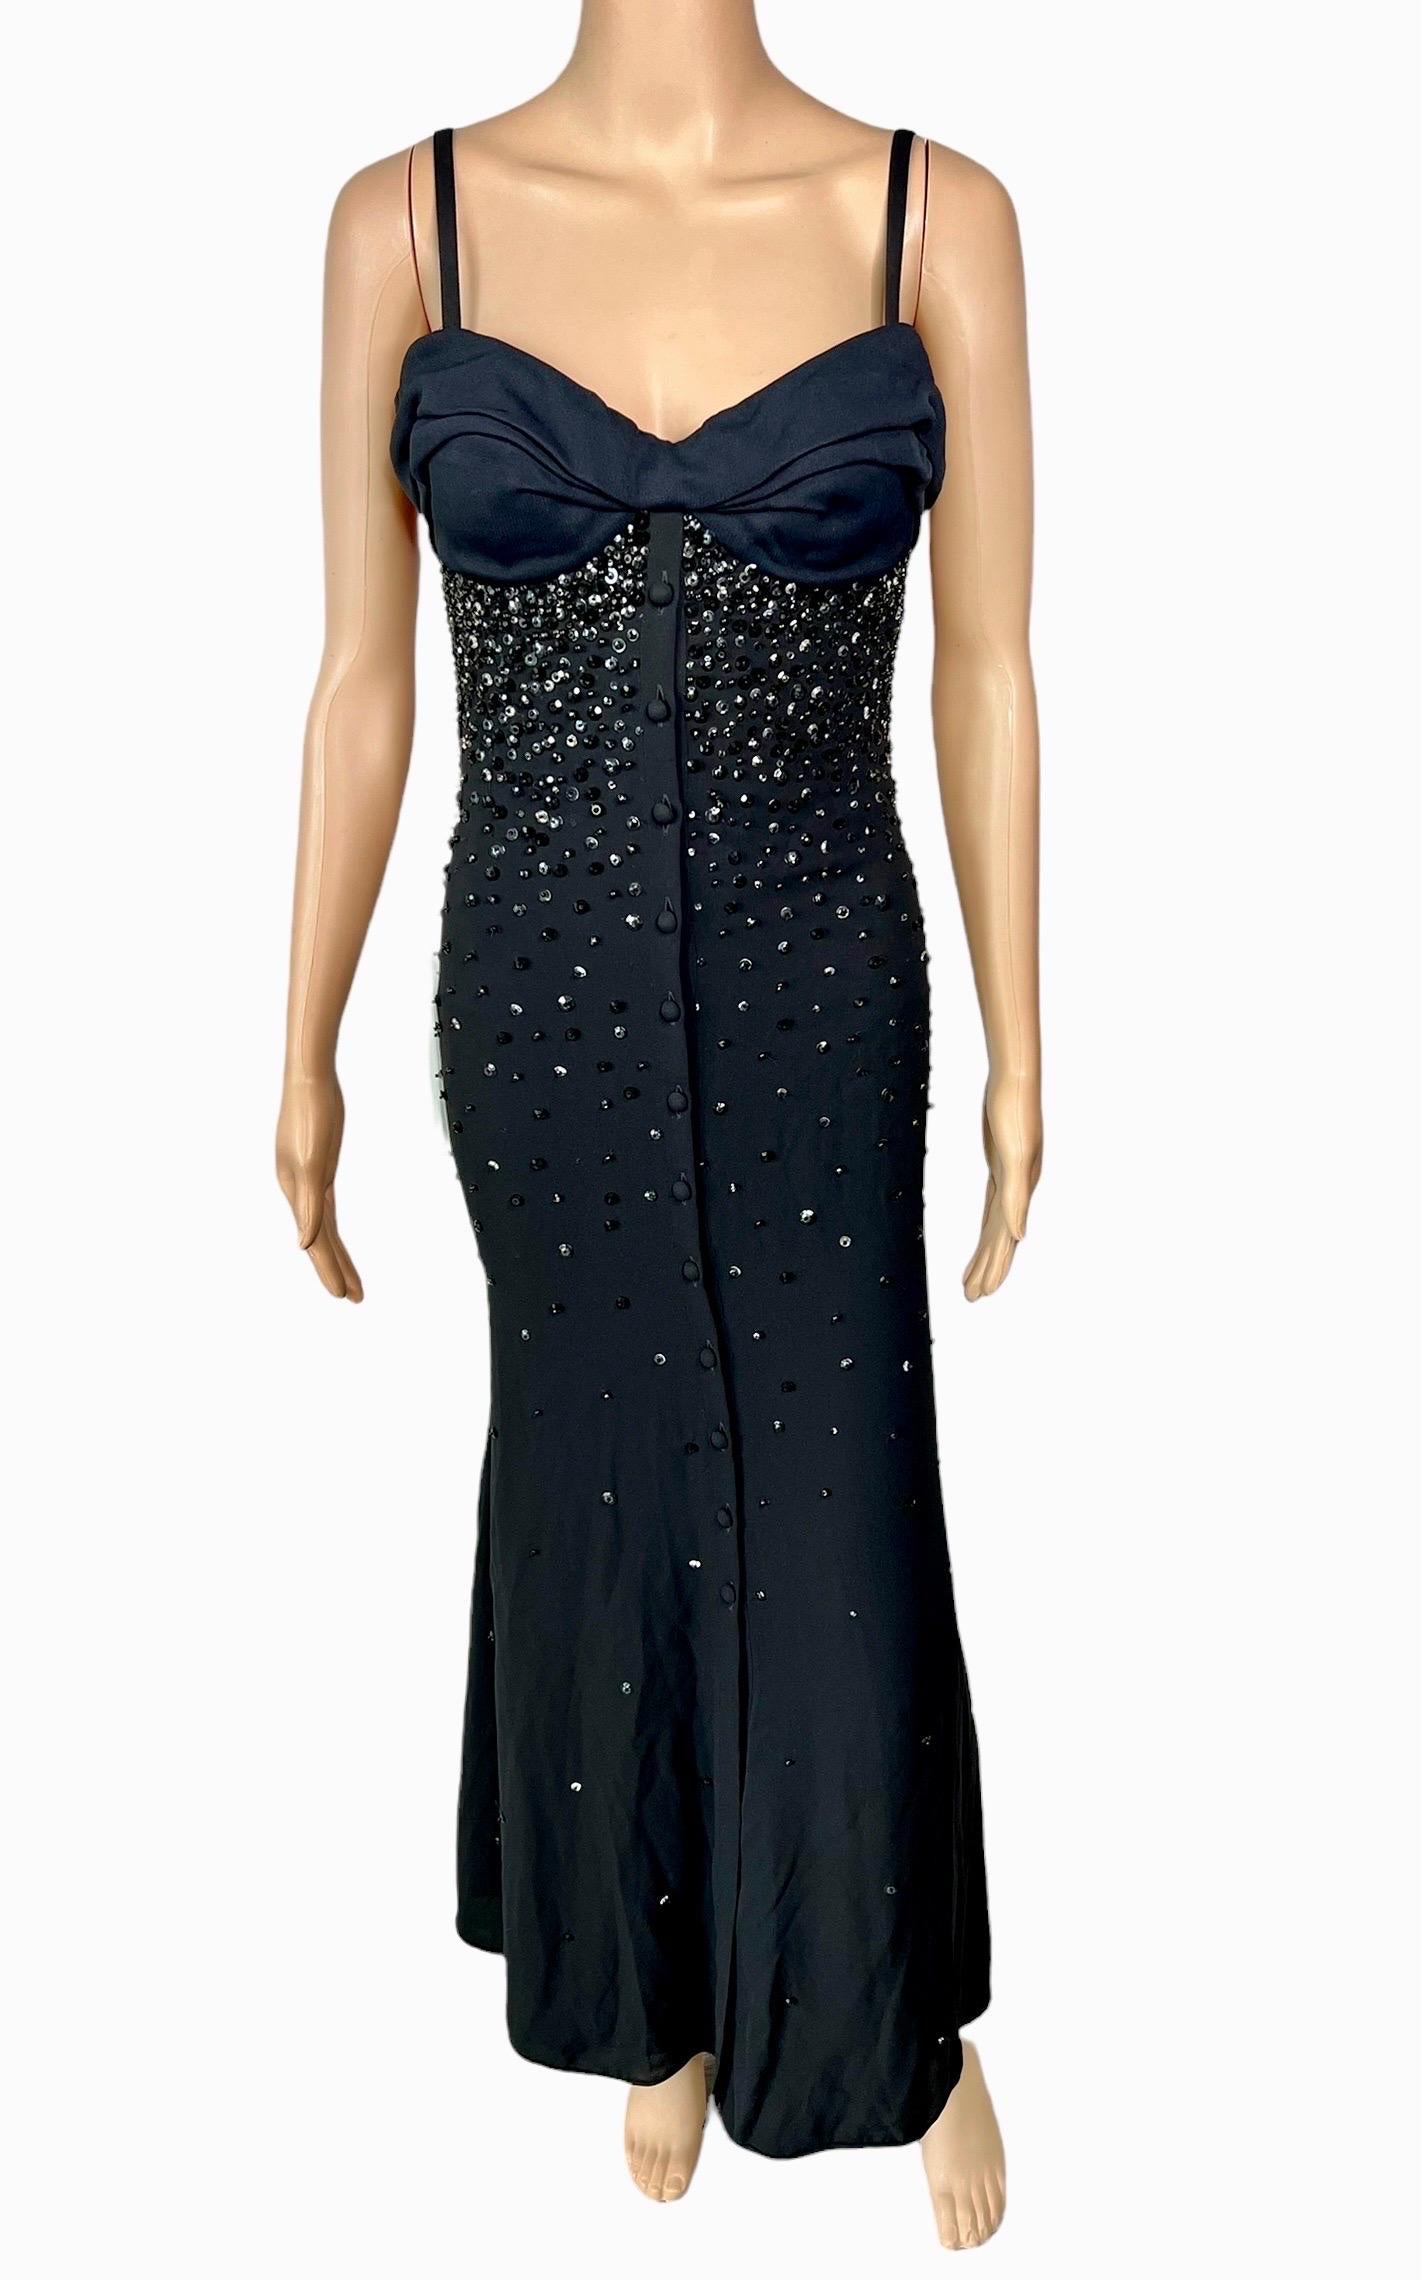 Gianni Versace S/S 1996 Runway Embellished Bustier Black Evening Dress Gown  For Sale 3